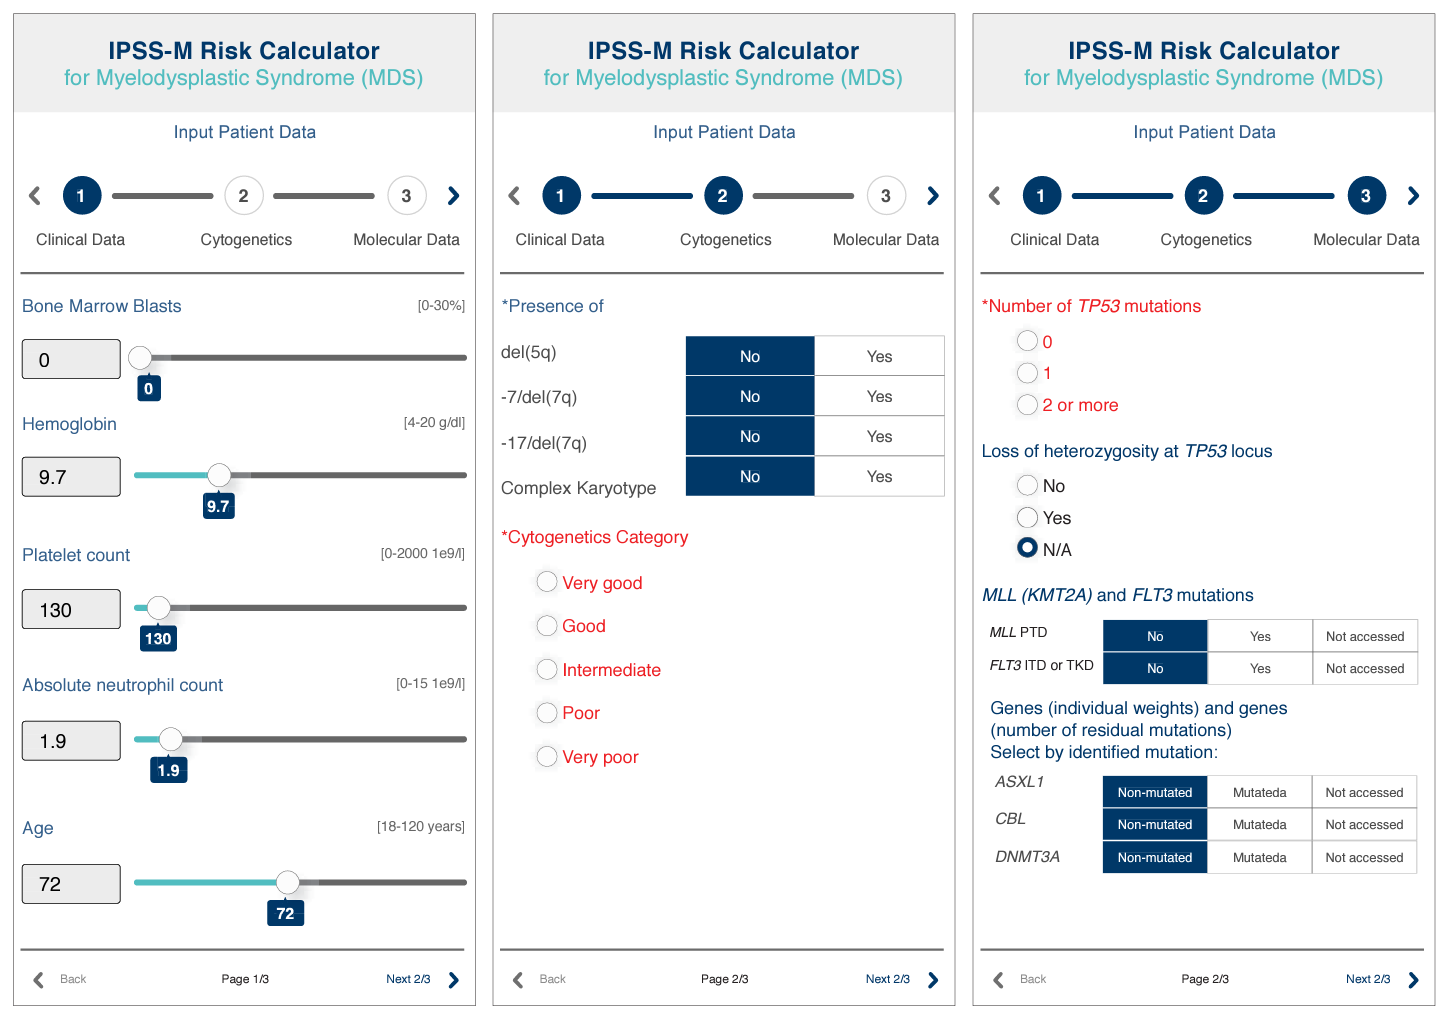 Figure. IPSS-M Risk Calculator for Myelodysplastic Syndrome1,2